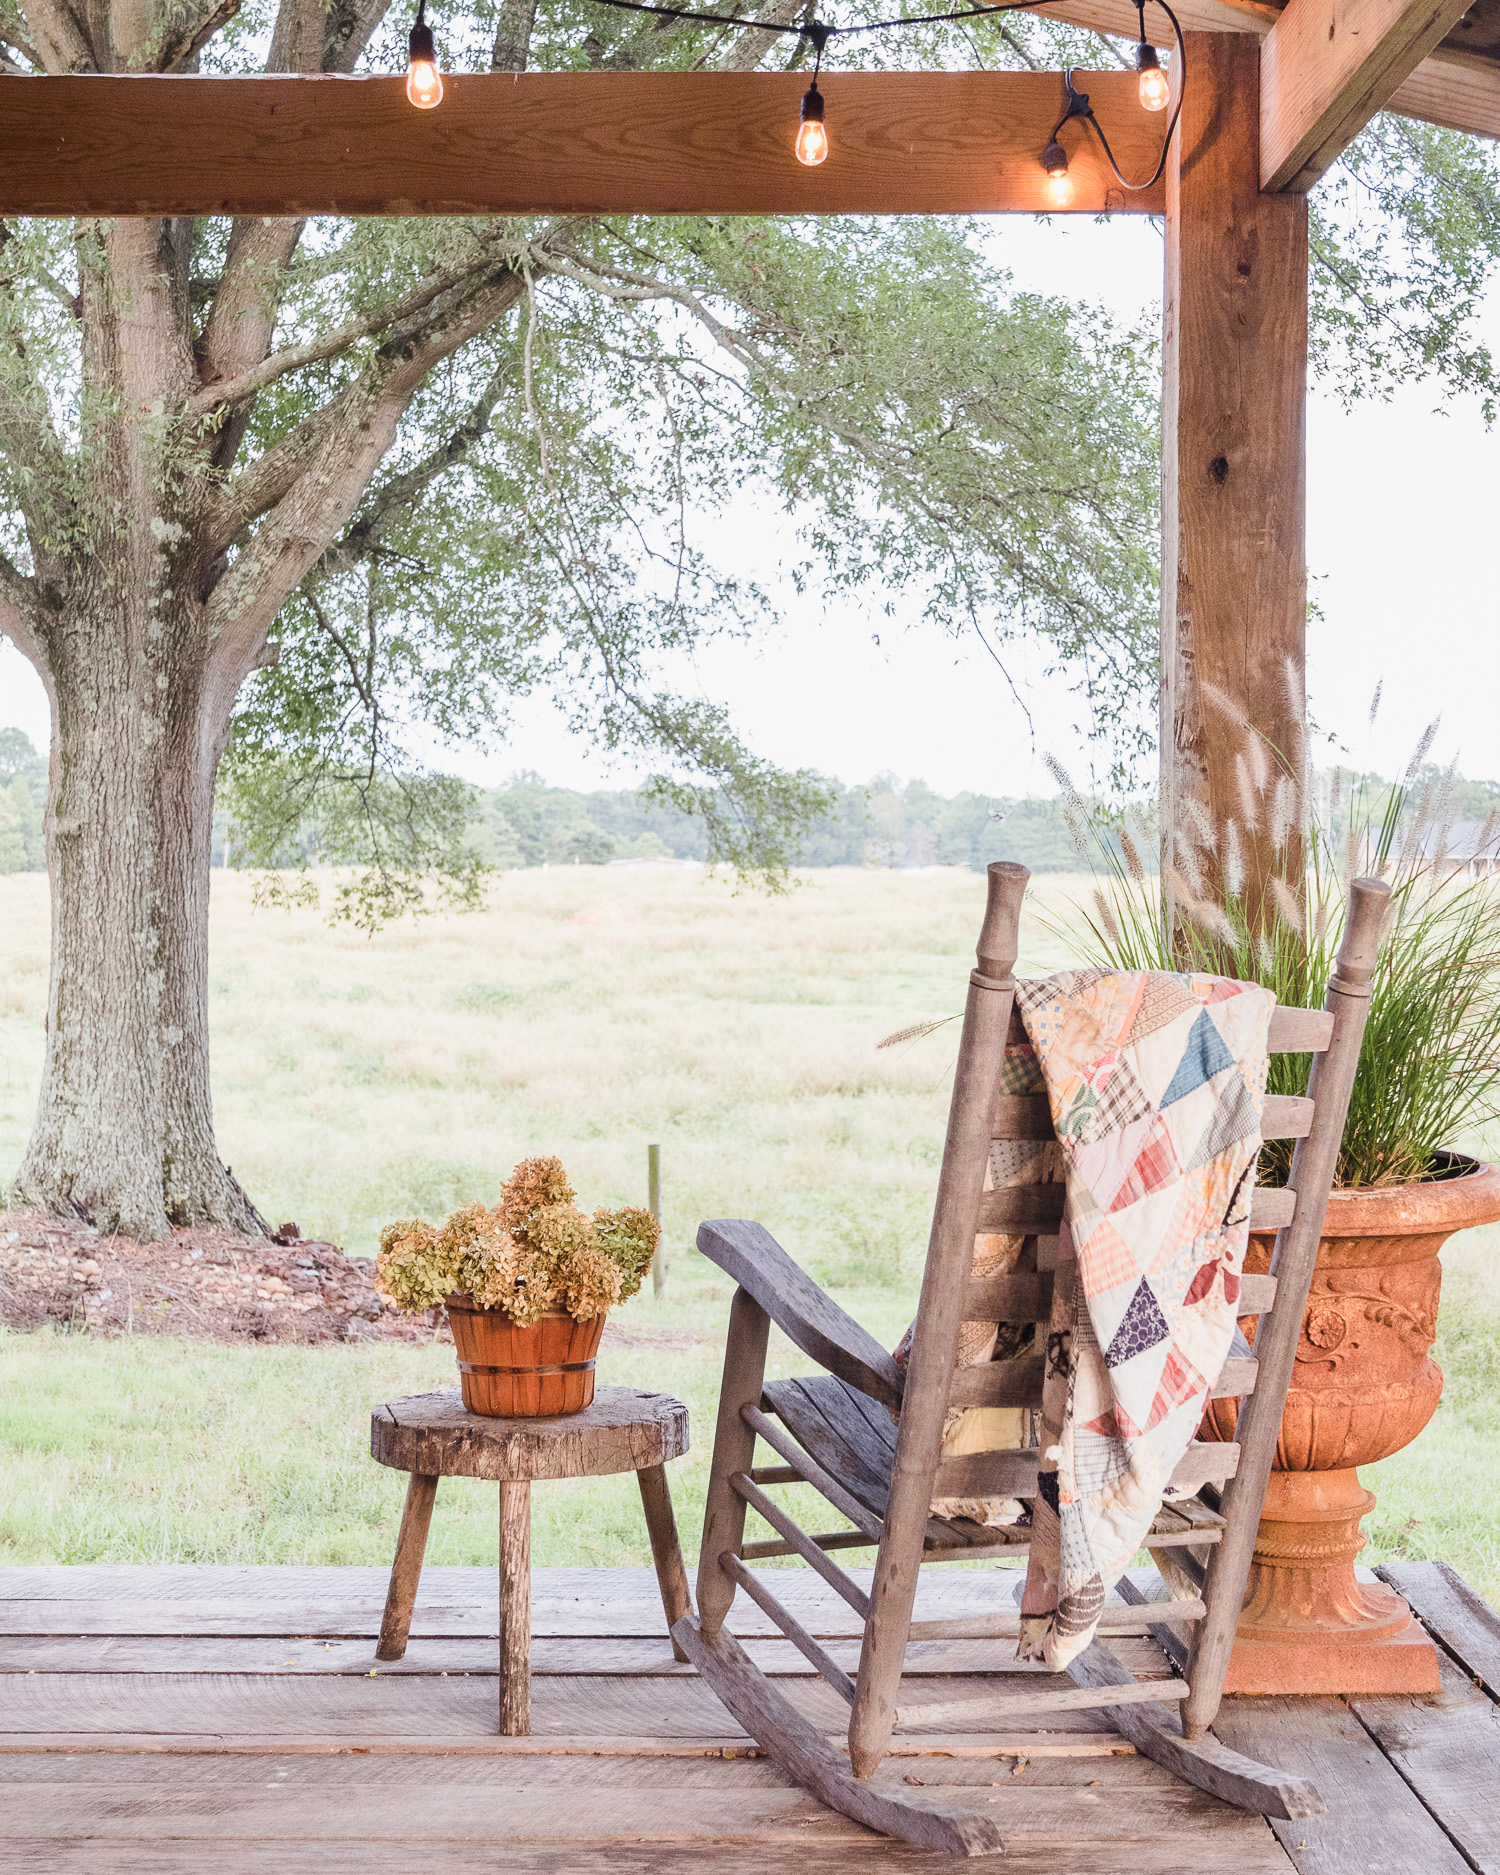 Happy Fall, simple fall decor ideas. Cozy quilts & rocking chairs